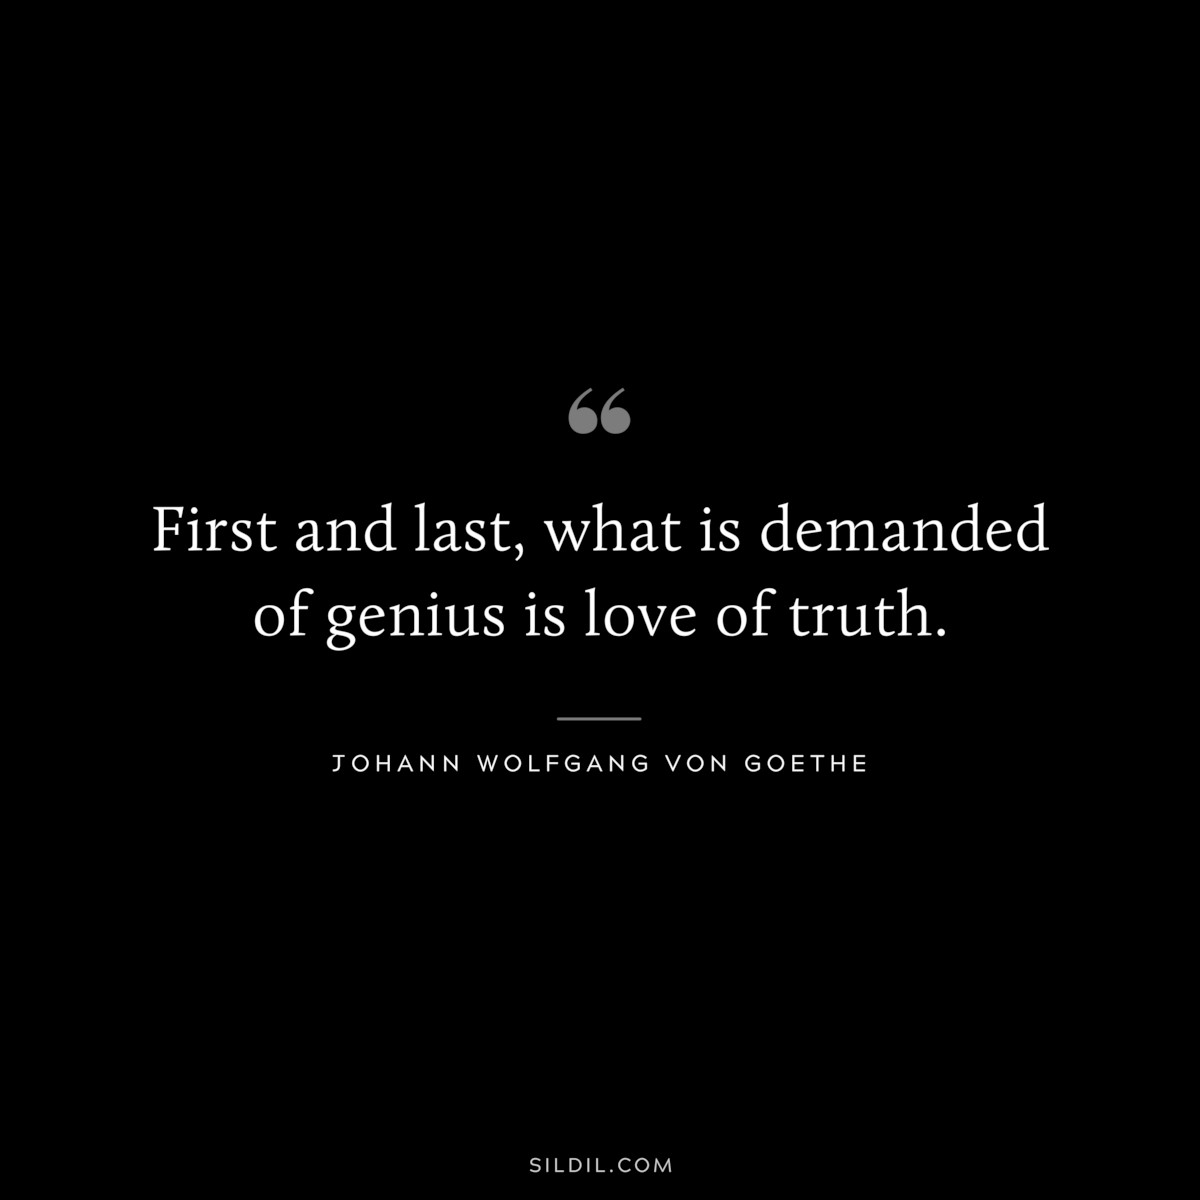 First and last, what is demanded of genius is love of truth.― Johann Wolfgang von Goethe